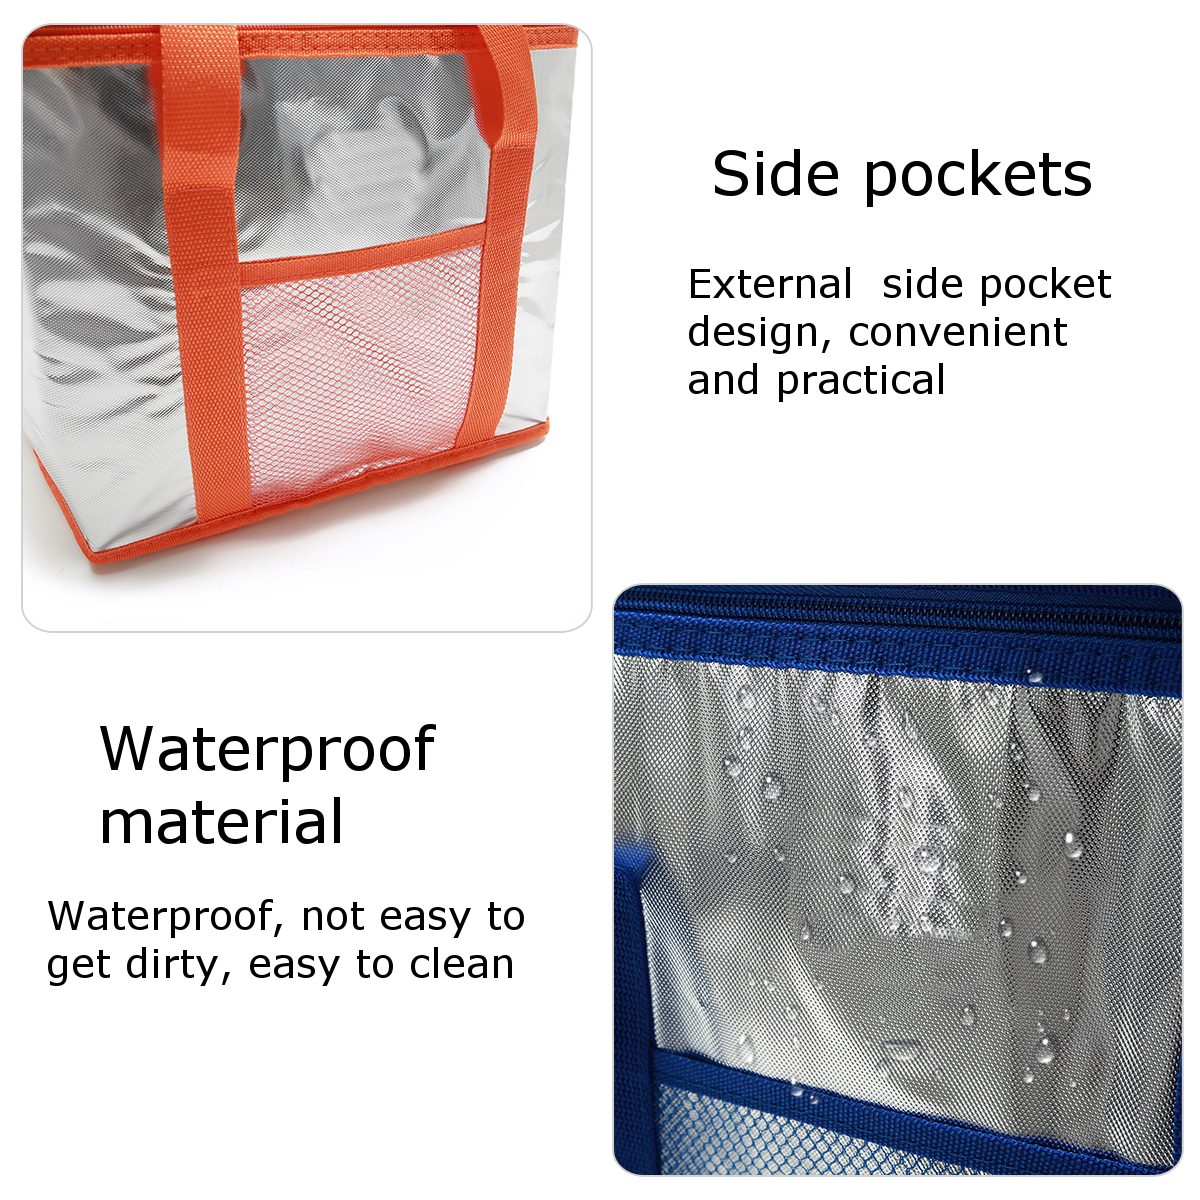 81626L-Picnic-Bag-Food-Delivery-Insulated-Bag-Lunch-Box-Storage-Bag-Outdoor-Camping-Travel-1855998-4